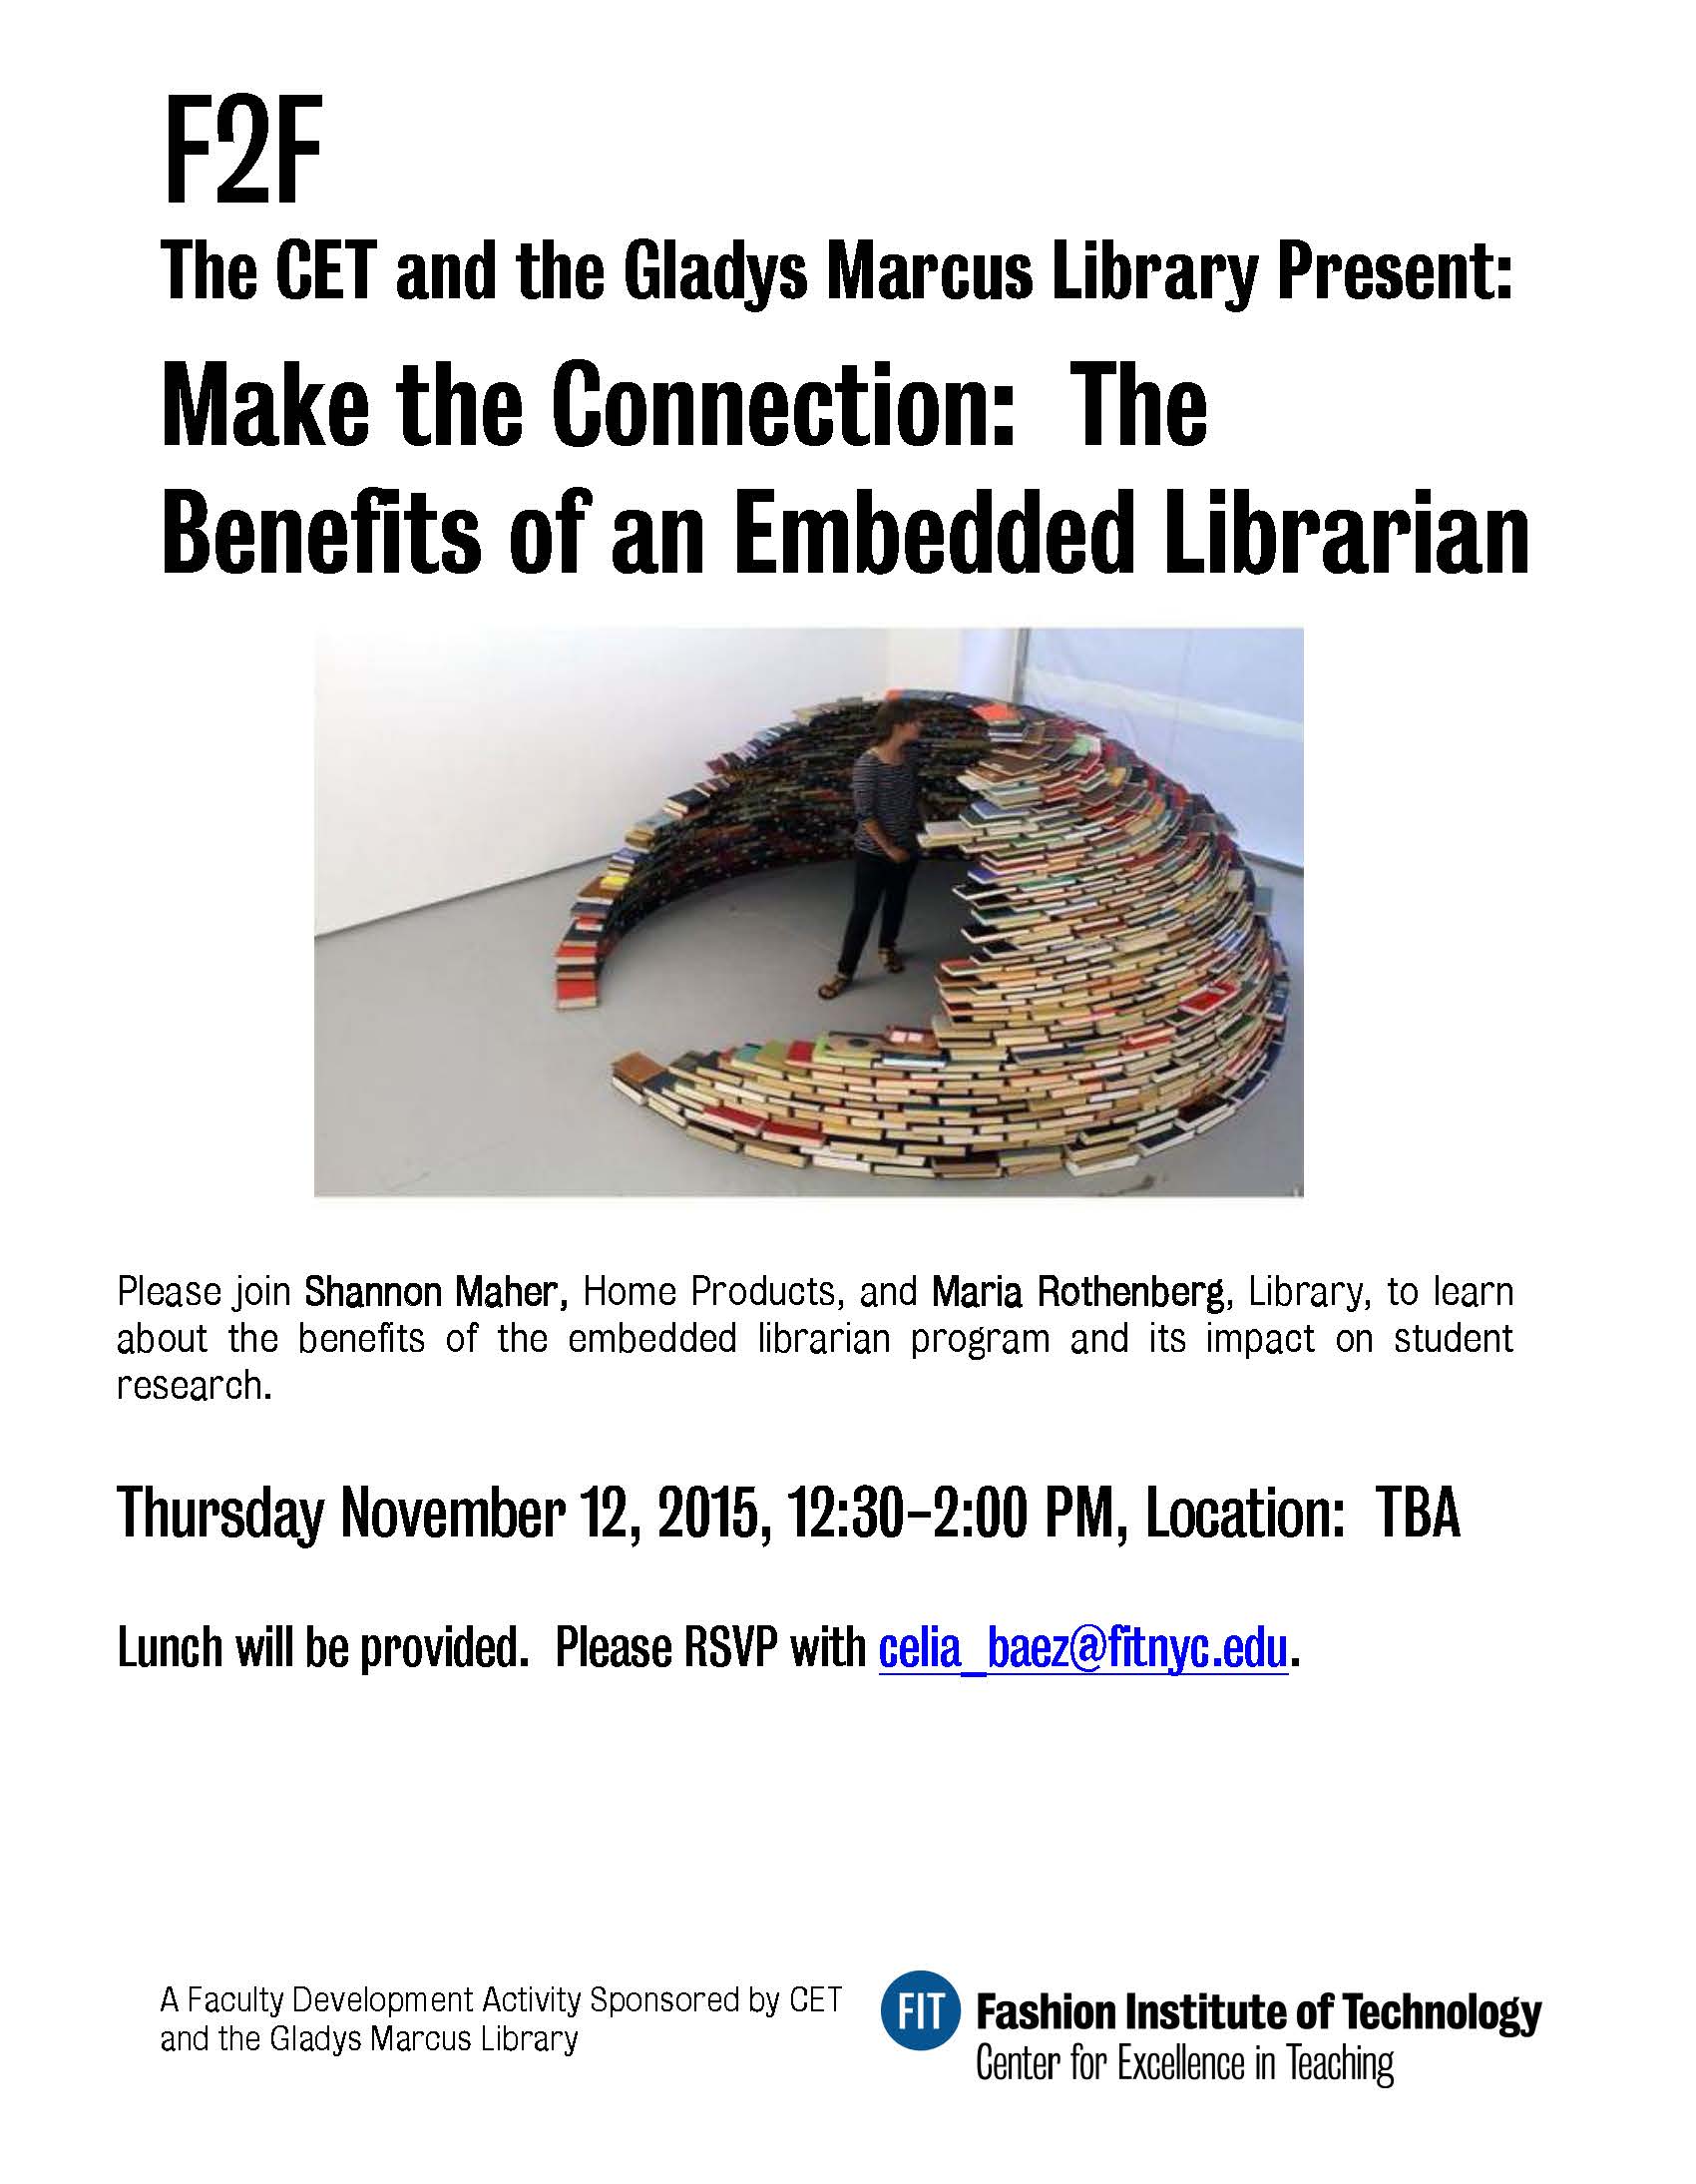 Make the Connection- Embedded Librarian 11-12-15 (2)